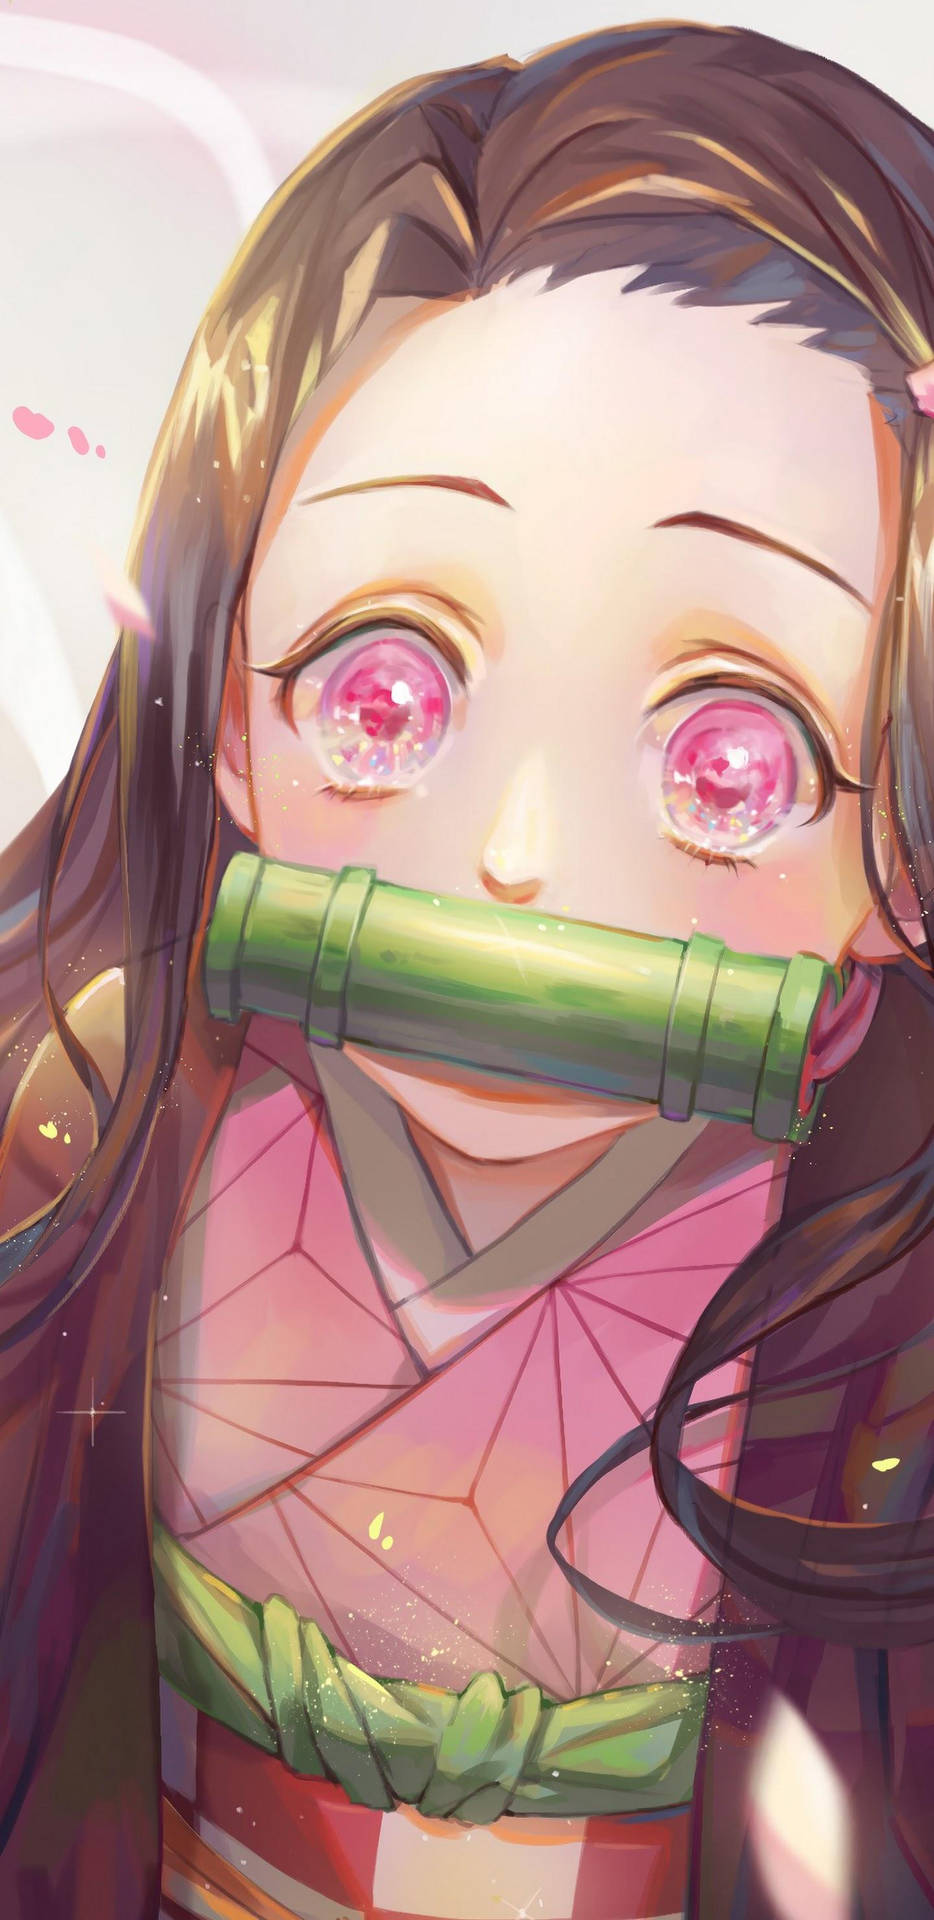 Enjoy a not-so-calm morning cup of coffee with Nezuko on your Iphone. Wallpaper